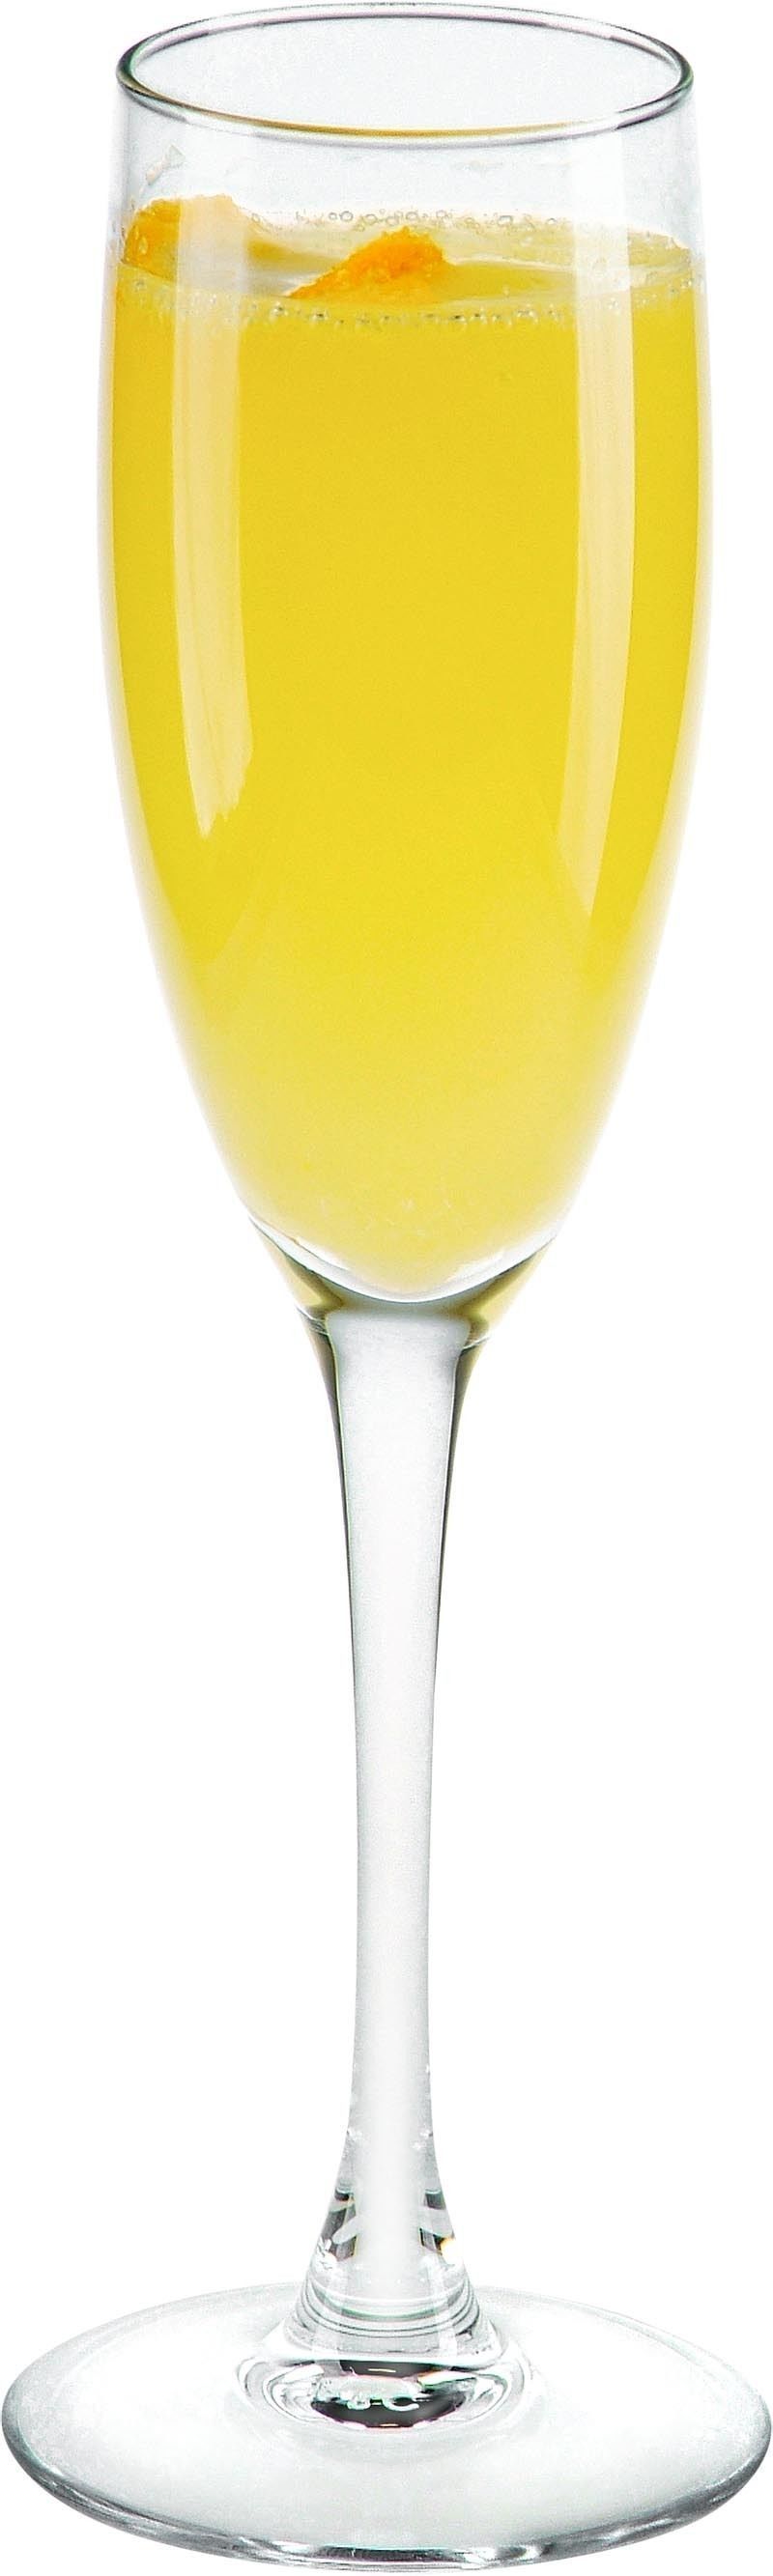 How to Make the Grand Mimosa